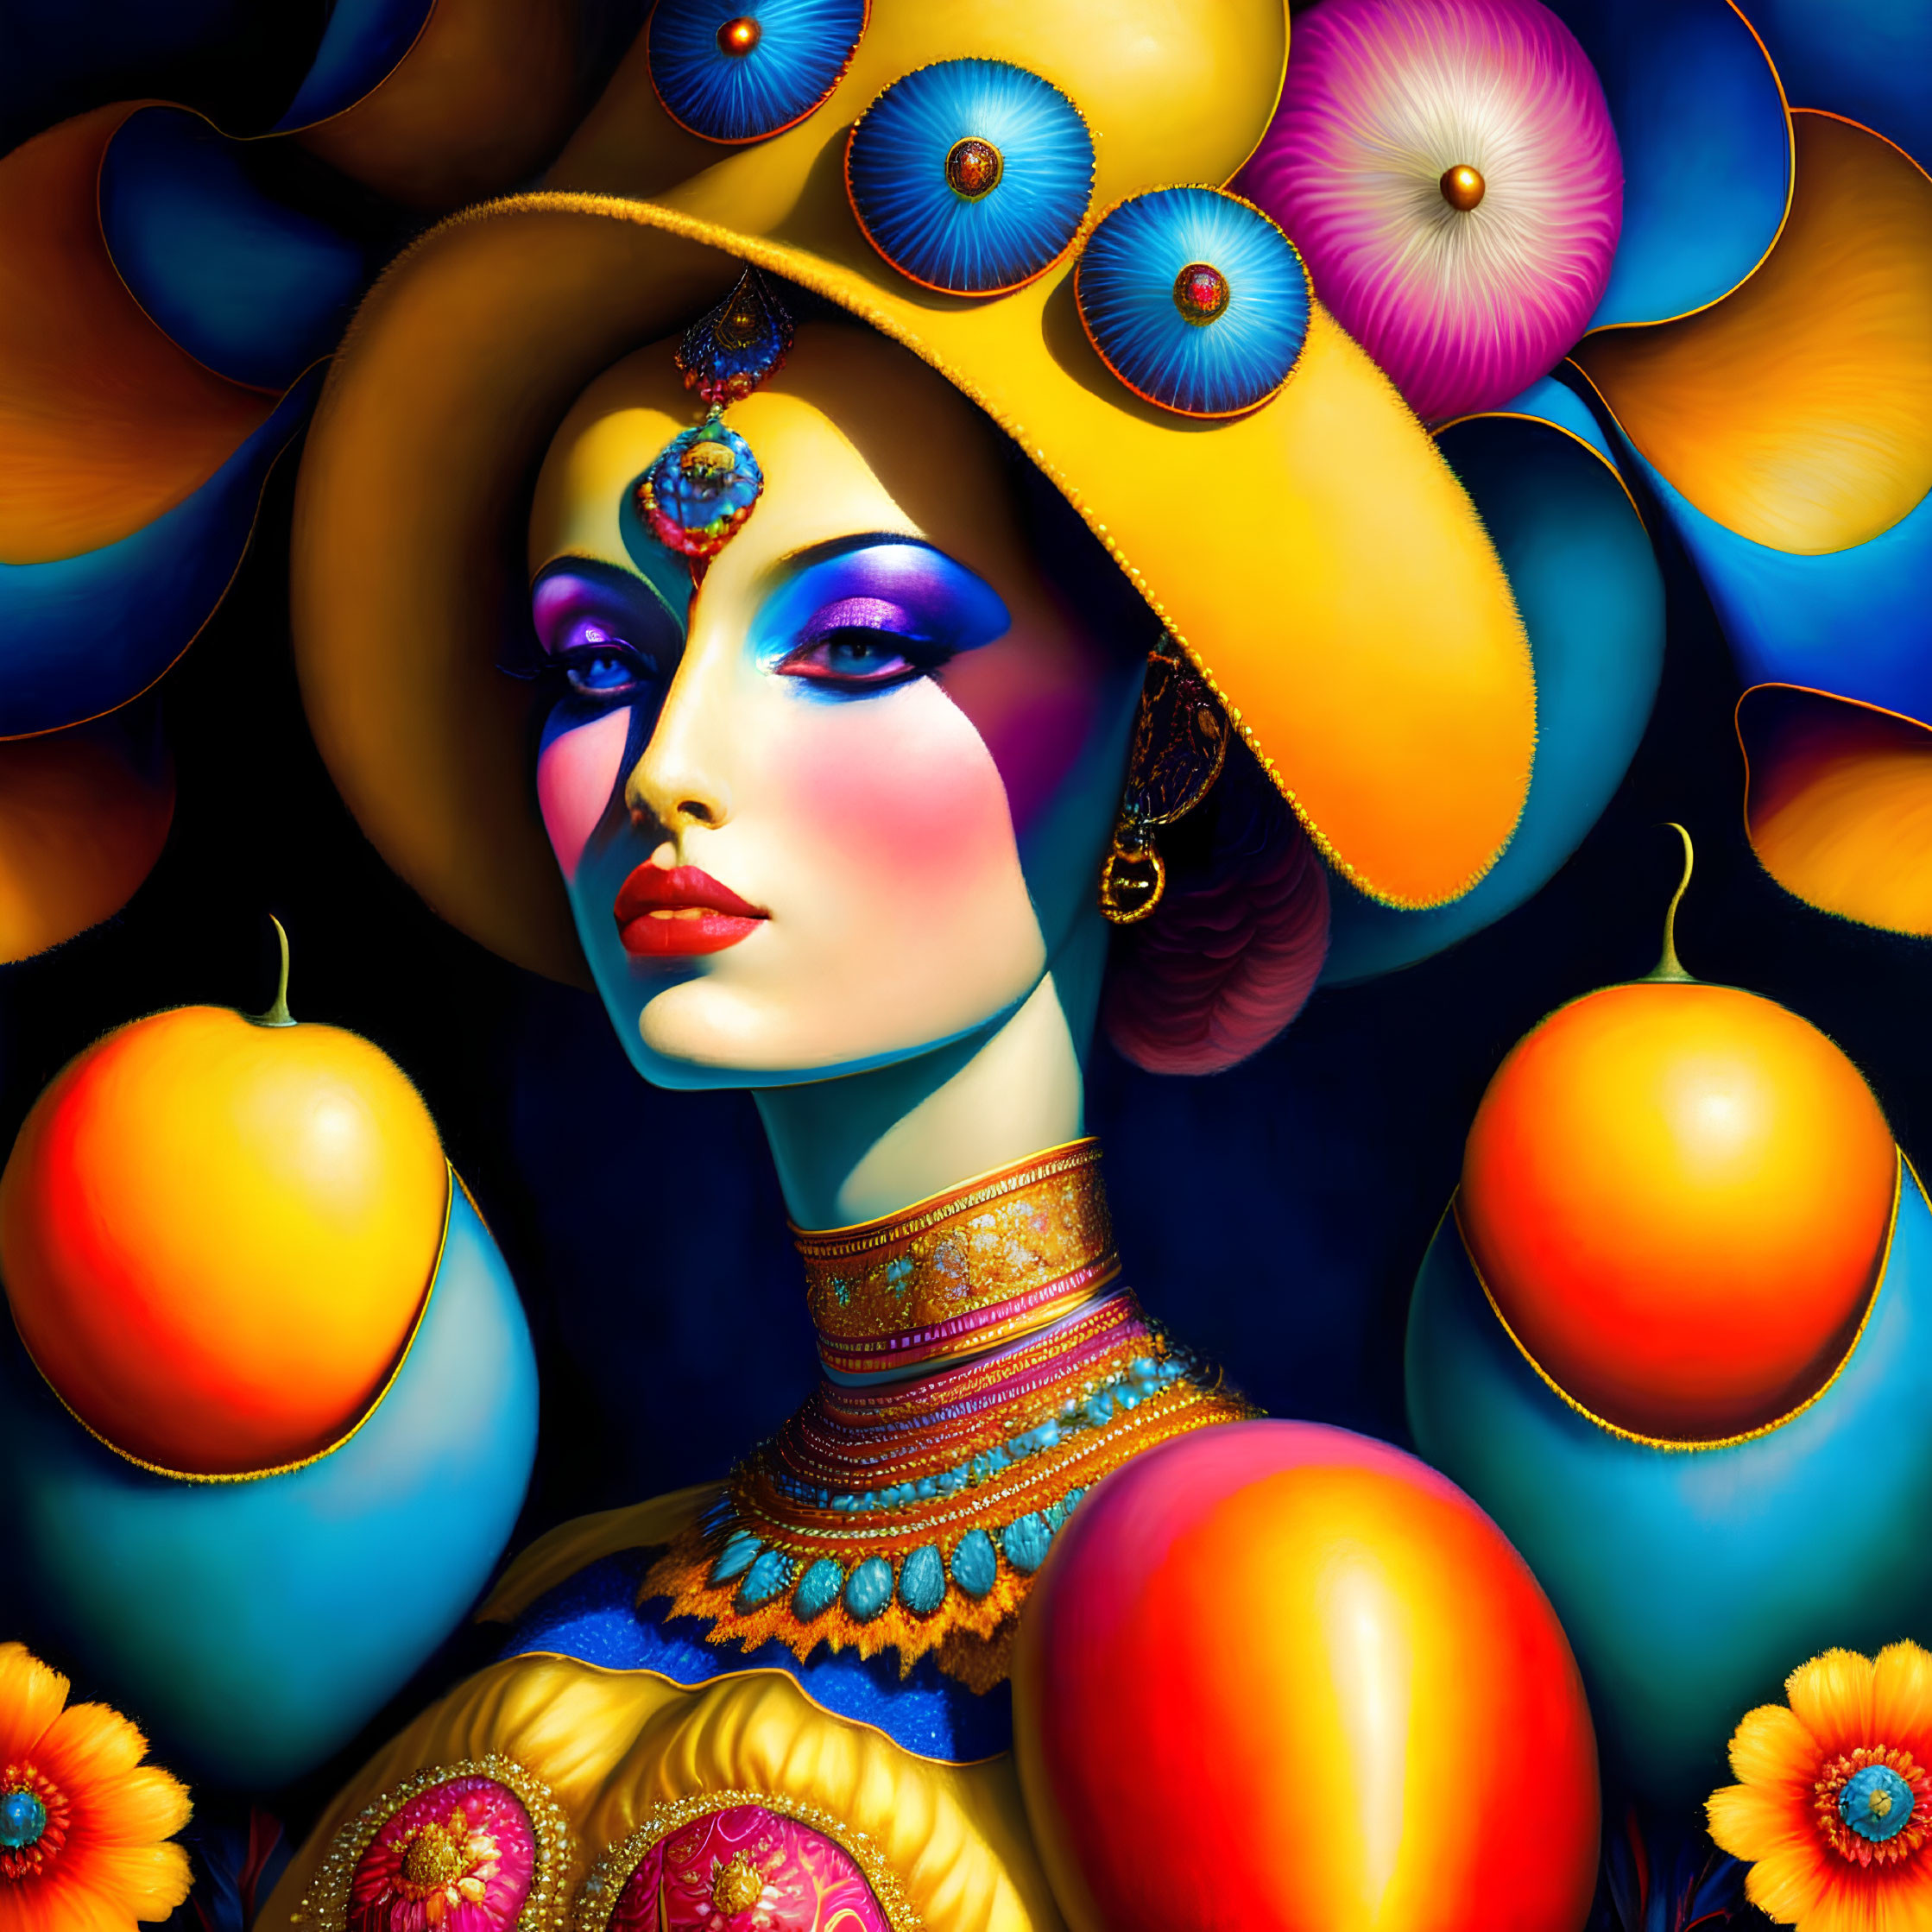 Vibrant surreal portrait of a woman with elaborate yellow hat and colorful flowers